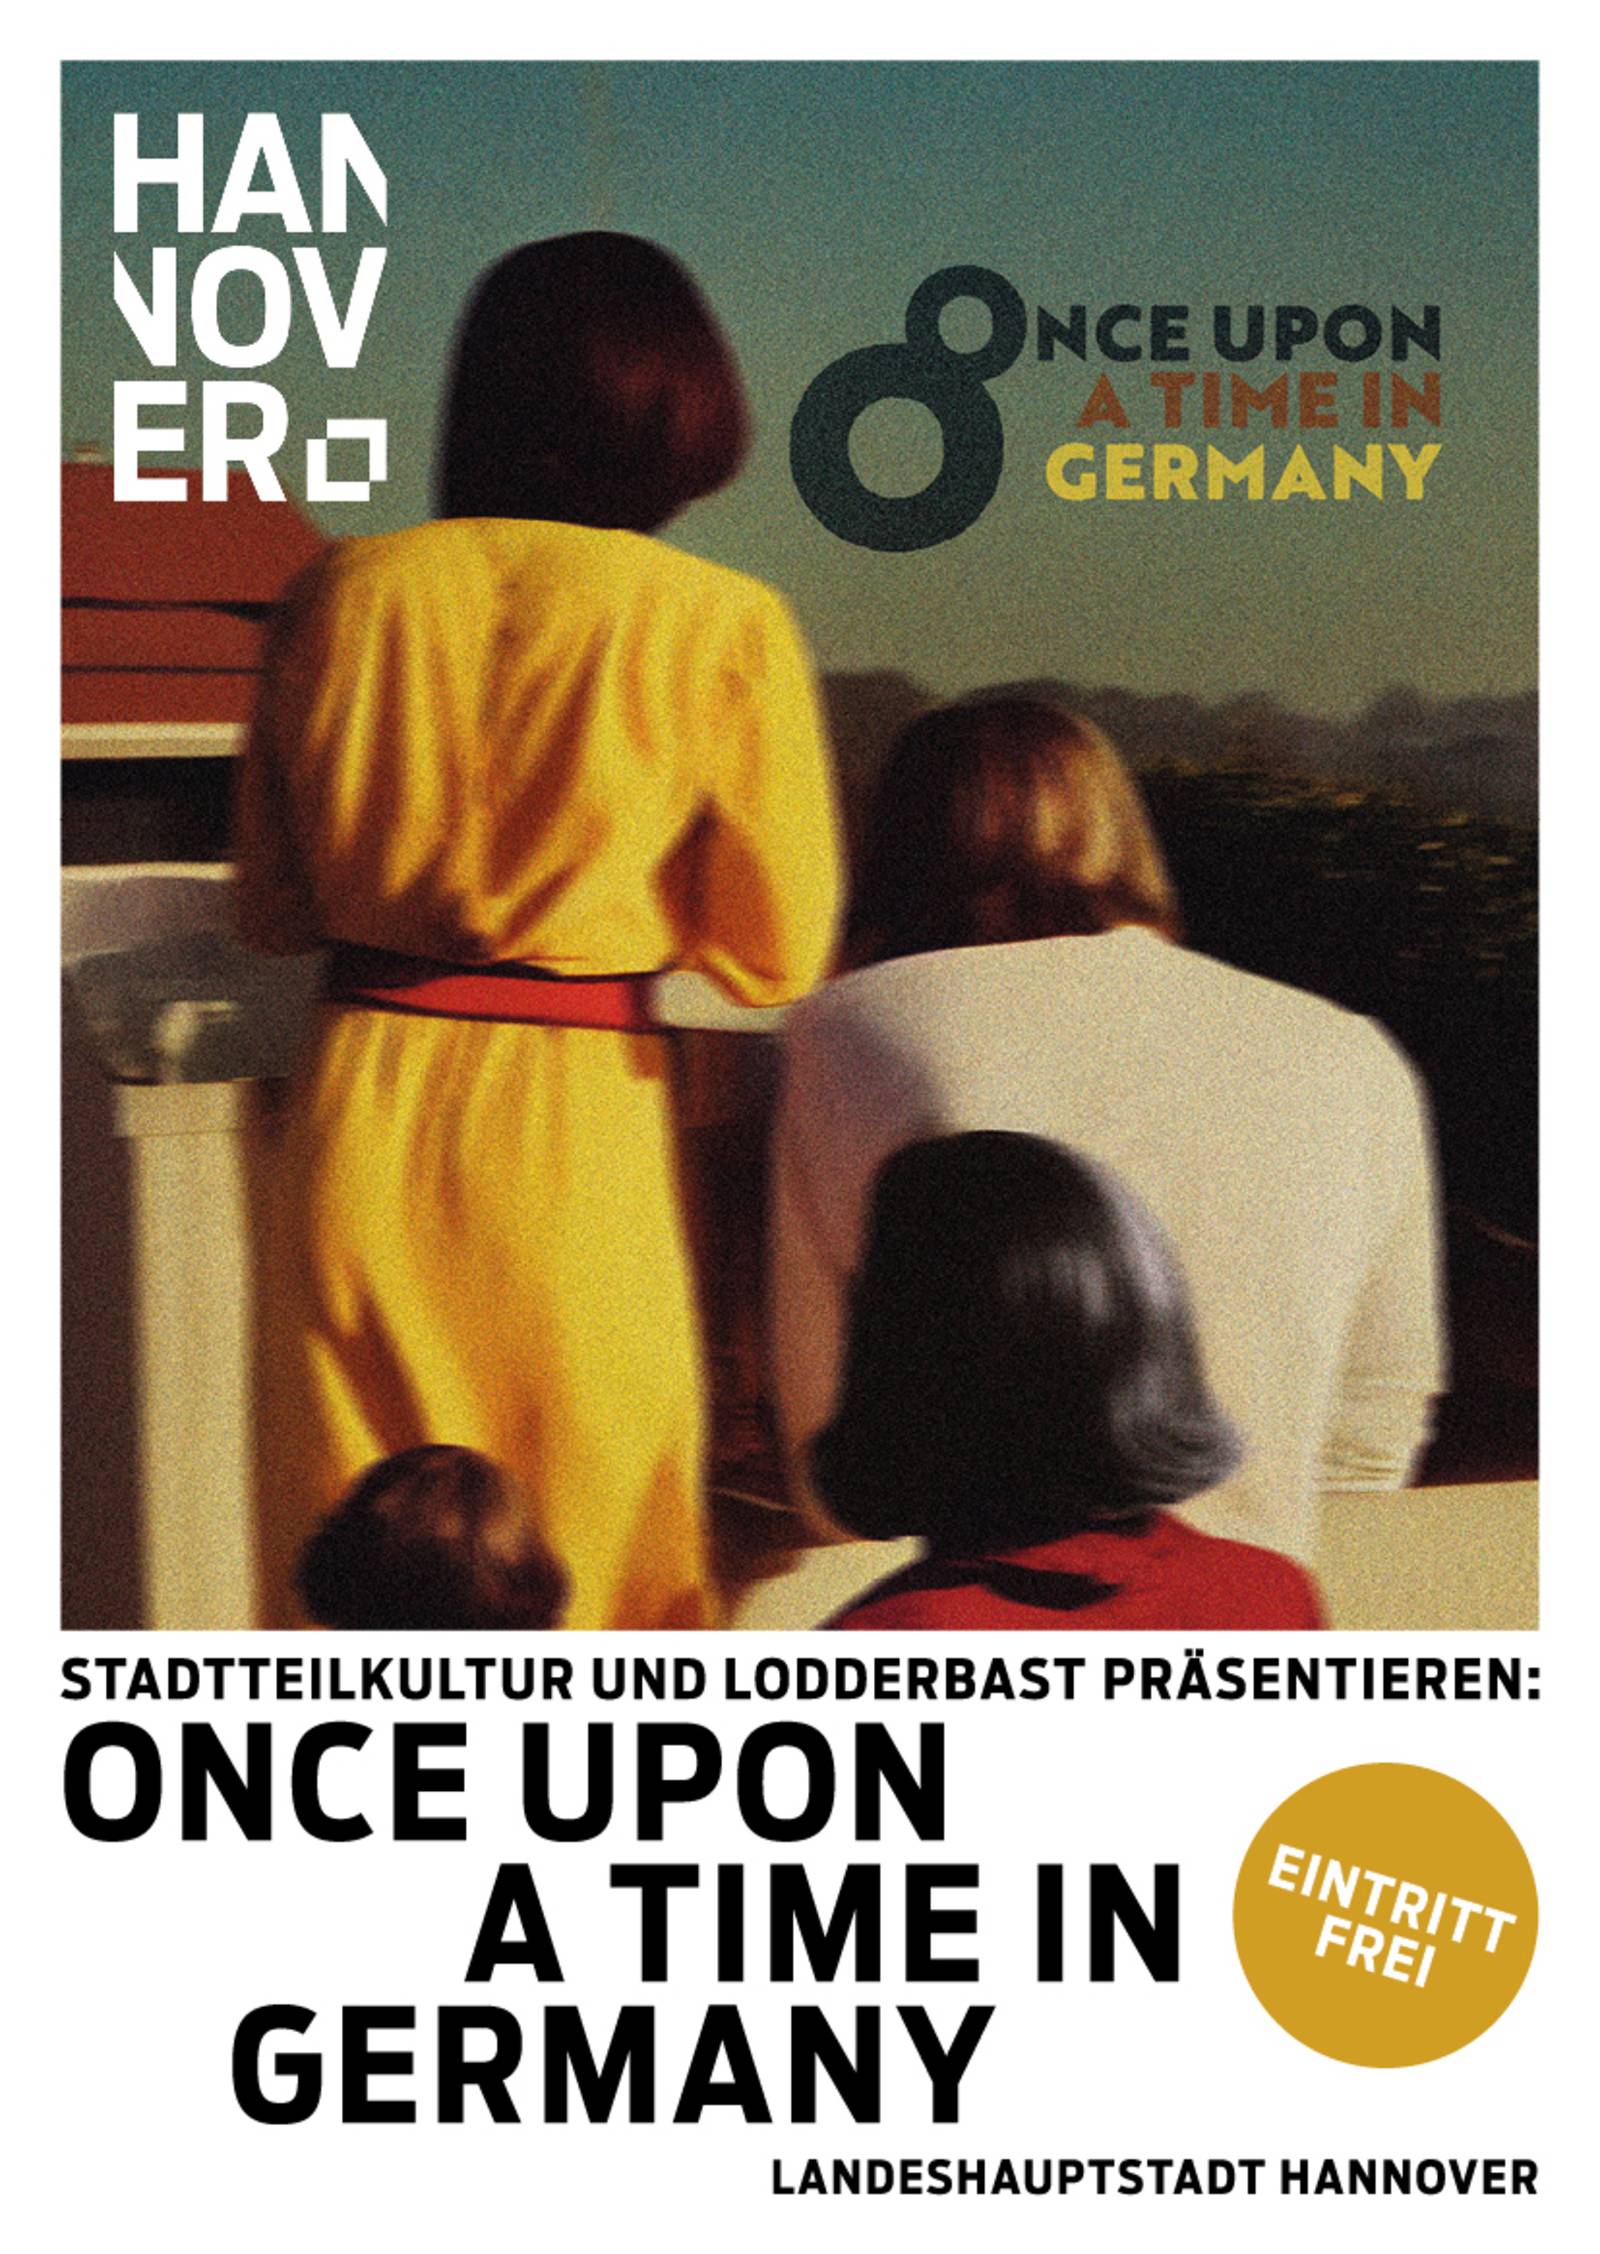 Titelbild "ONCE UPON A TIME"